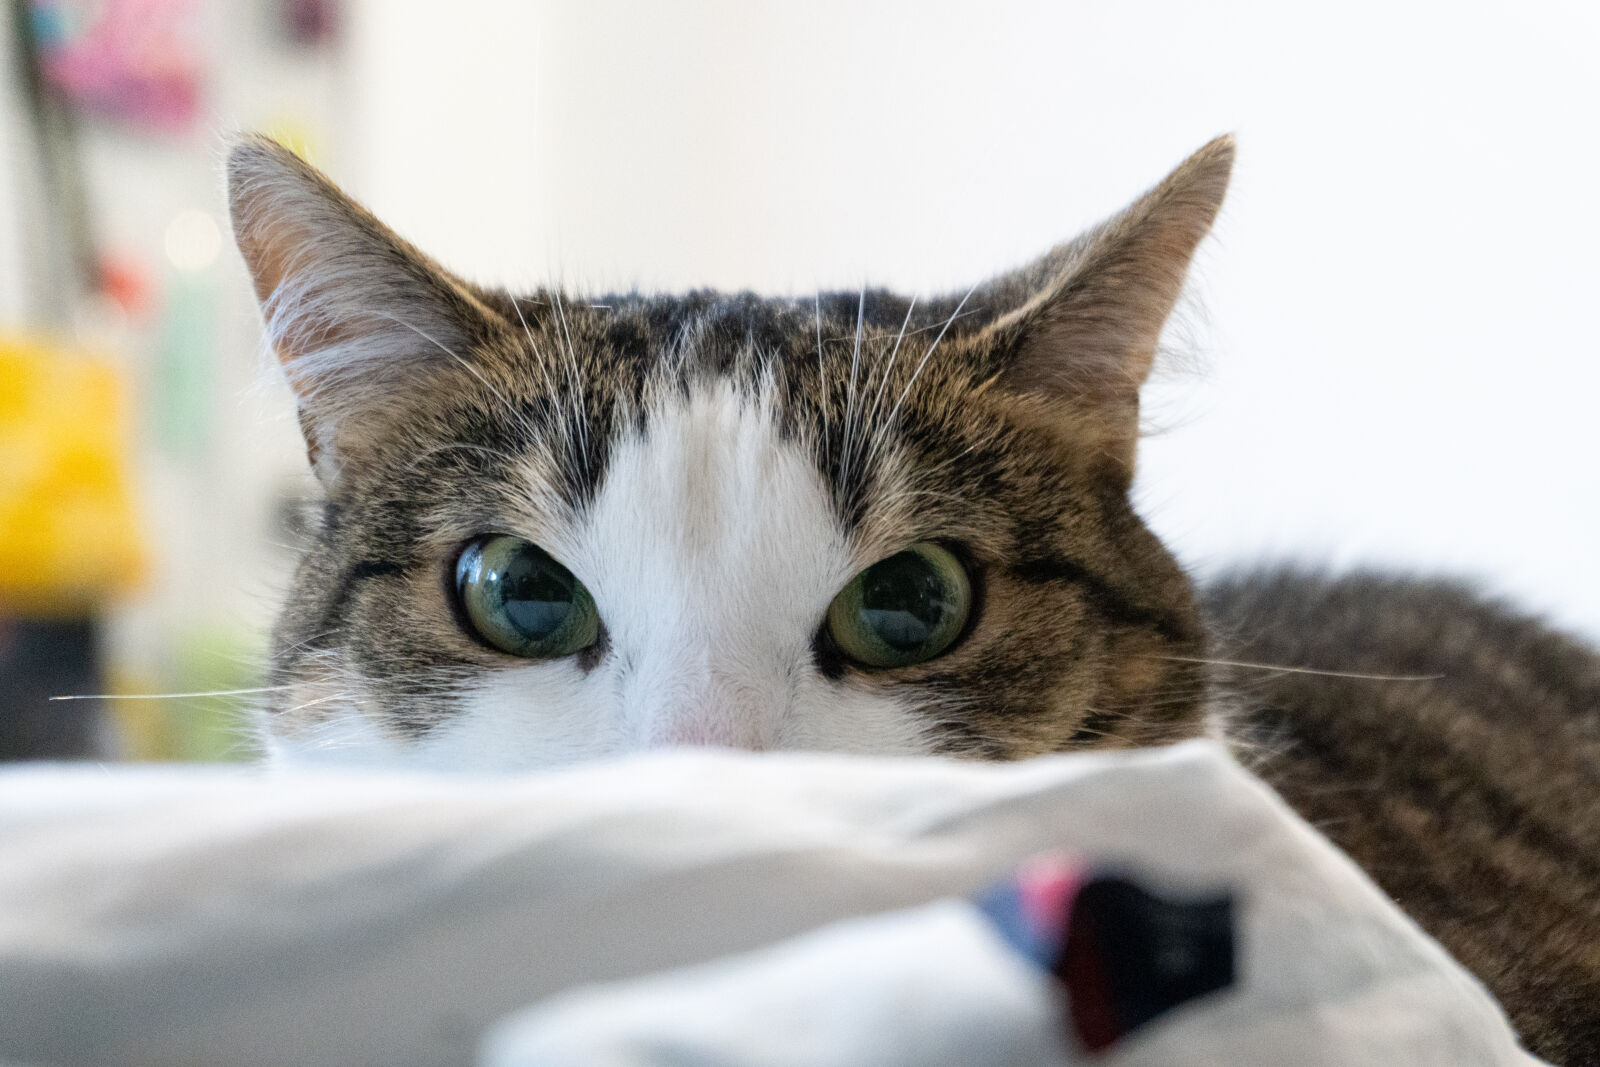 Sony a6700 sample photo. Cat staring photography